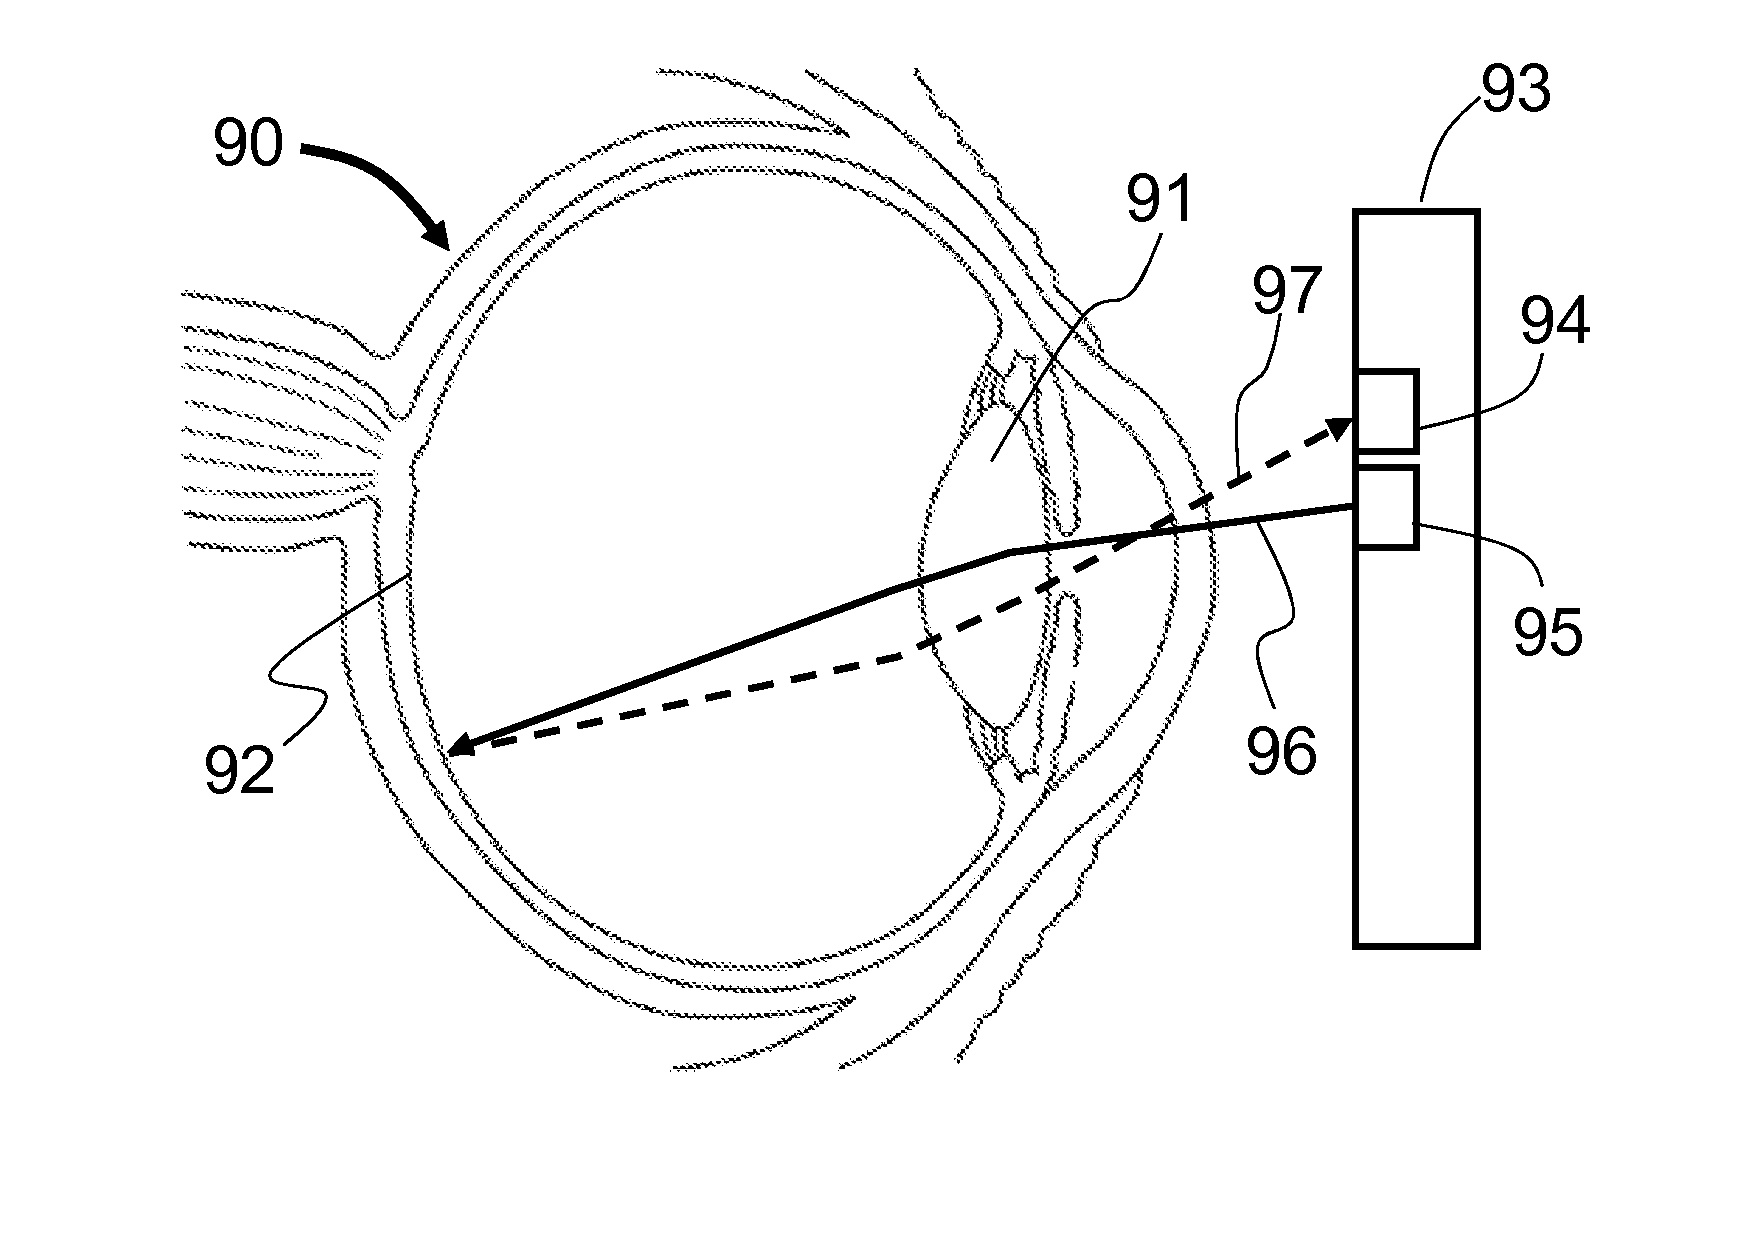 Method and apparatus to produce re-focusable vision with detecting re-focusing event from human eye